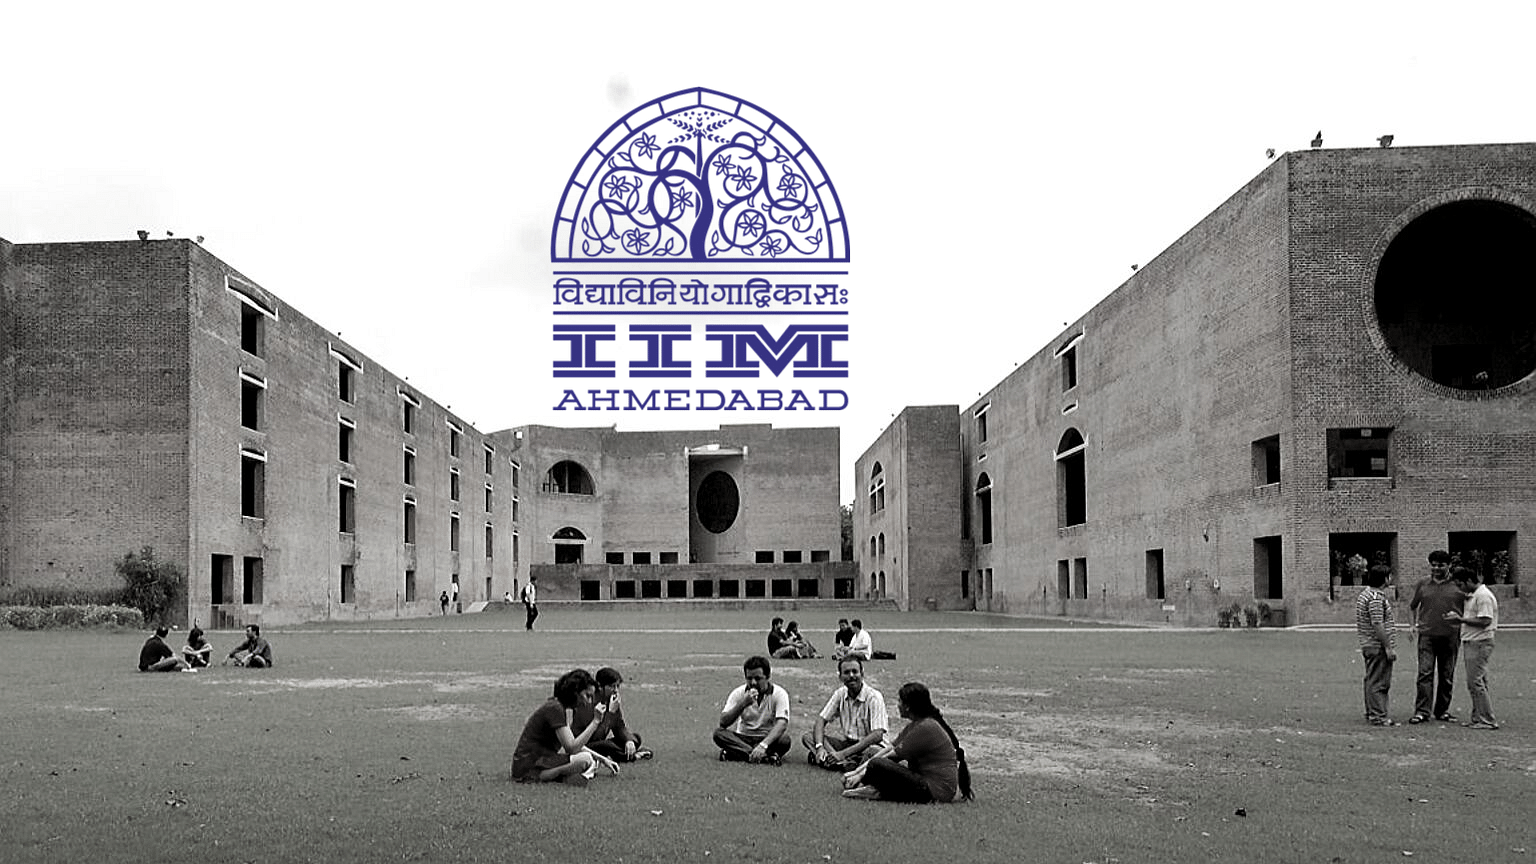 IIM Ahmedabad is breaking the law by not providing reservations to SC/ST/OBCs for its PhD course, argues an open letter sent to the business school.